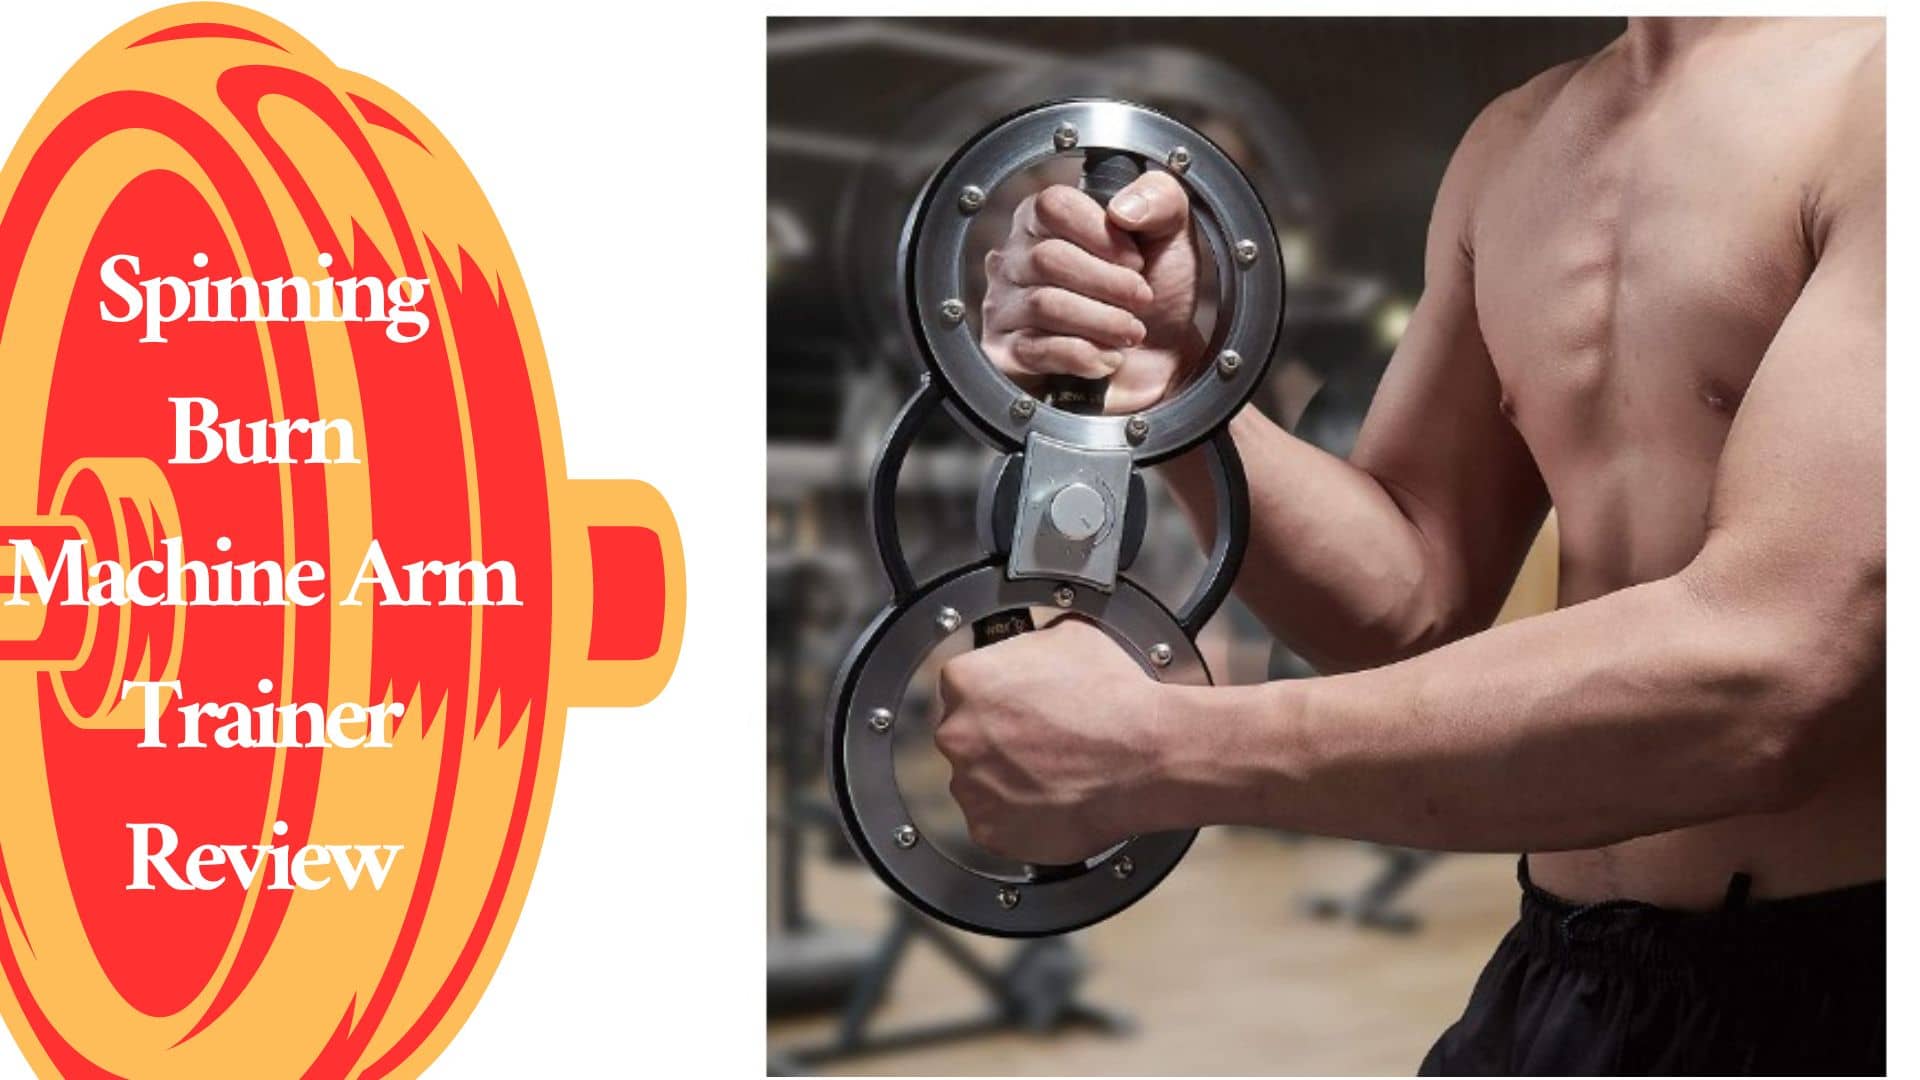 Spinning Burn Machine Arm Trainer Review